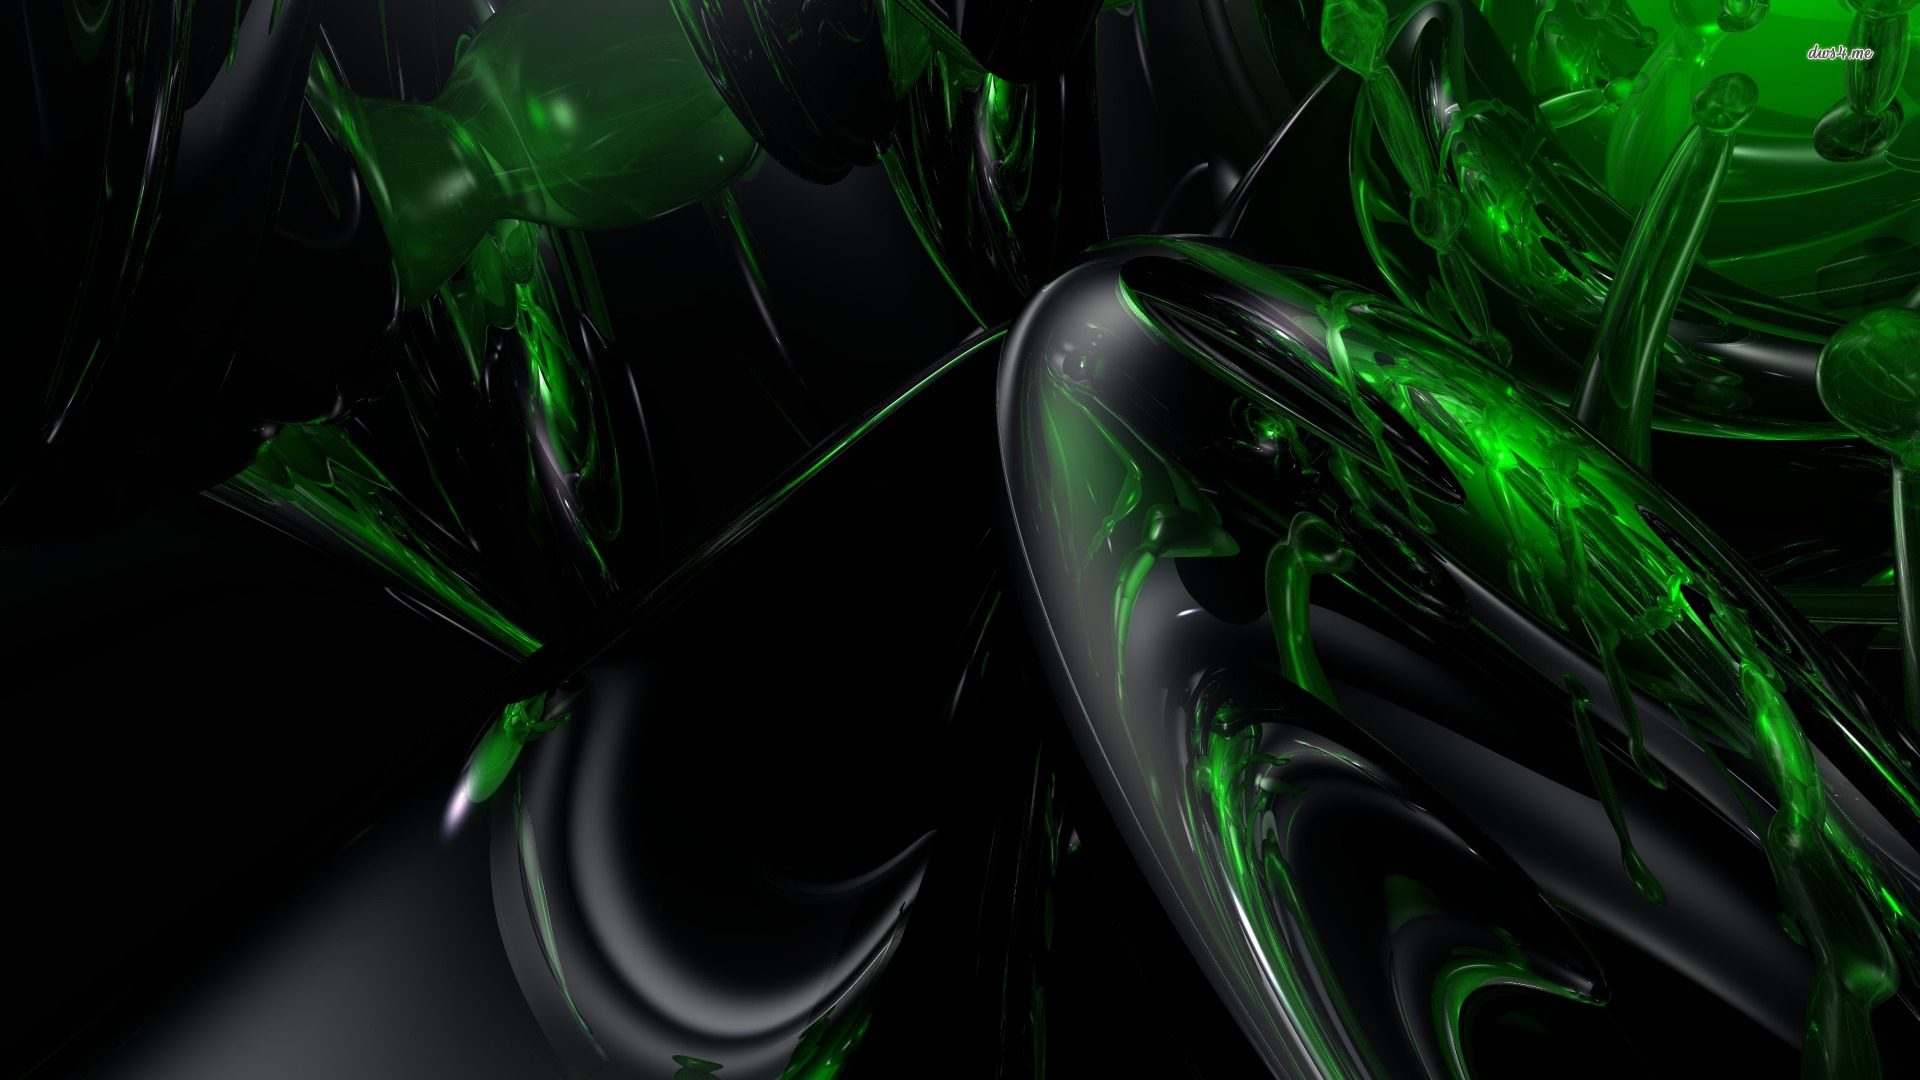 Another Set Of Abstract Black Themed Wallpaper In HD Design